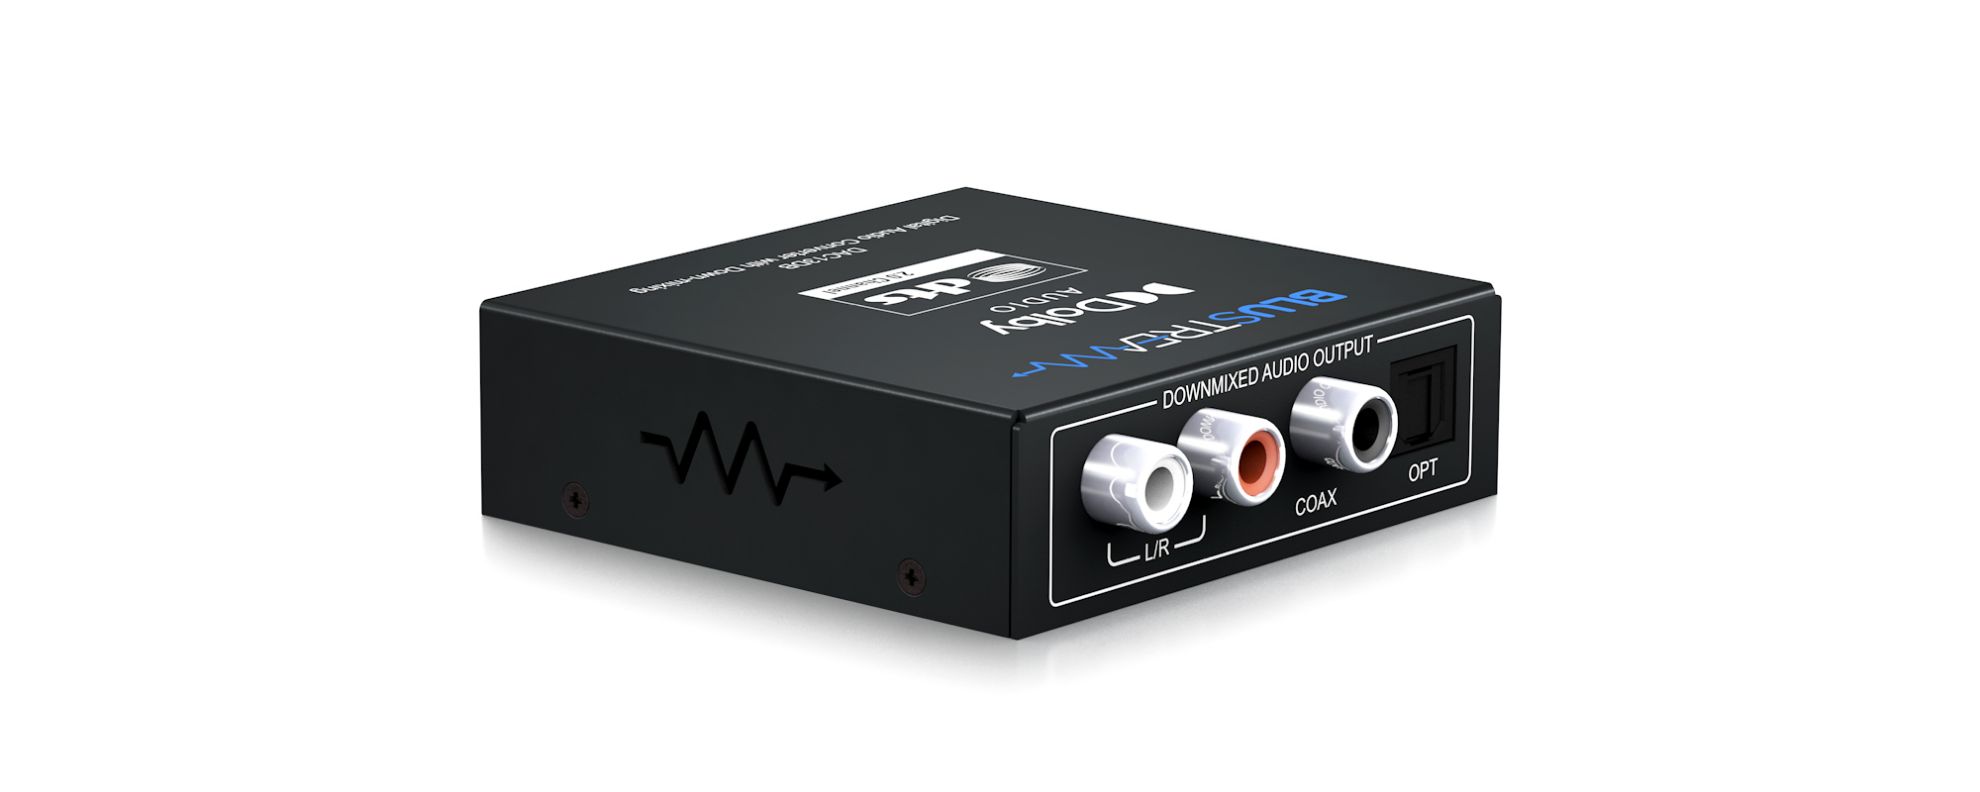 DAC13DB | Digital Audio Converter with Dolby Audio and DTS Audio Down-mixing. 9340242003430